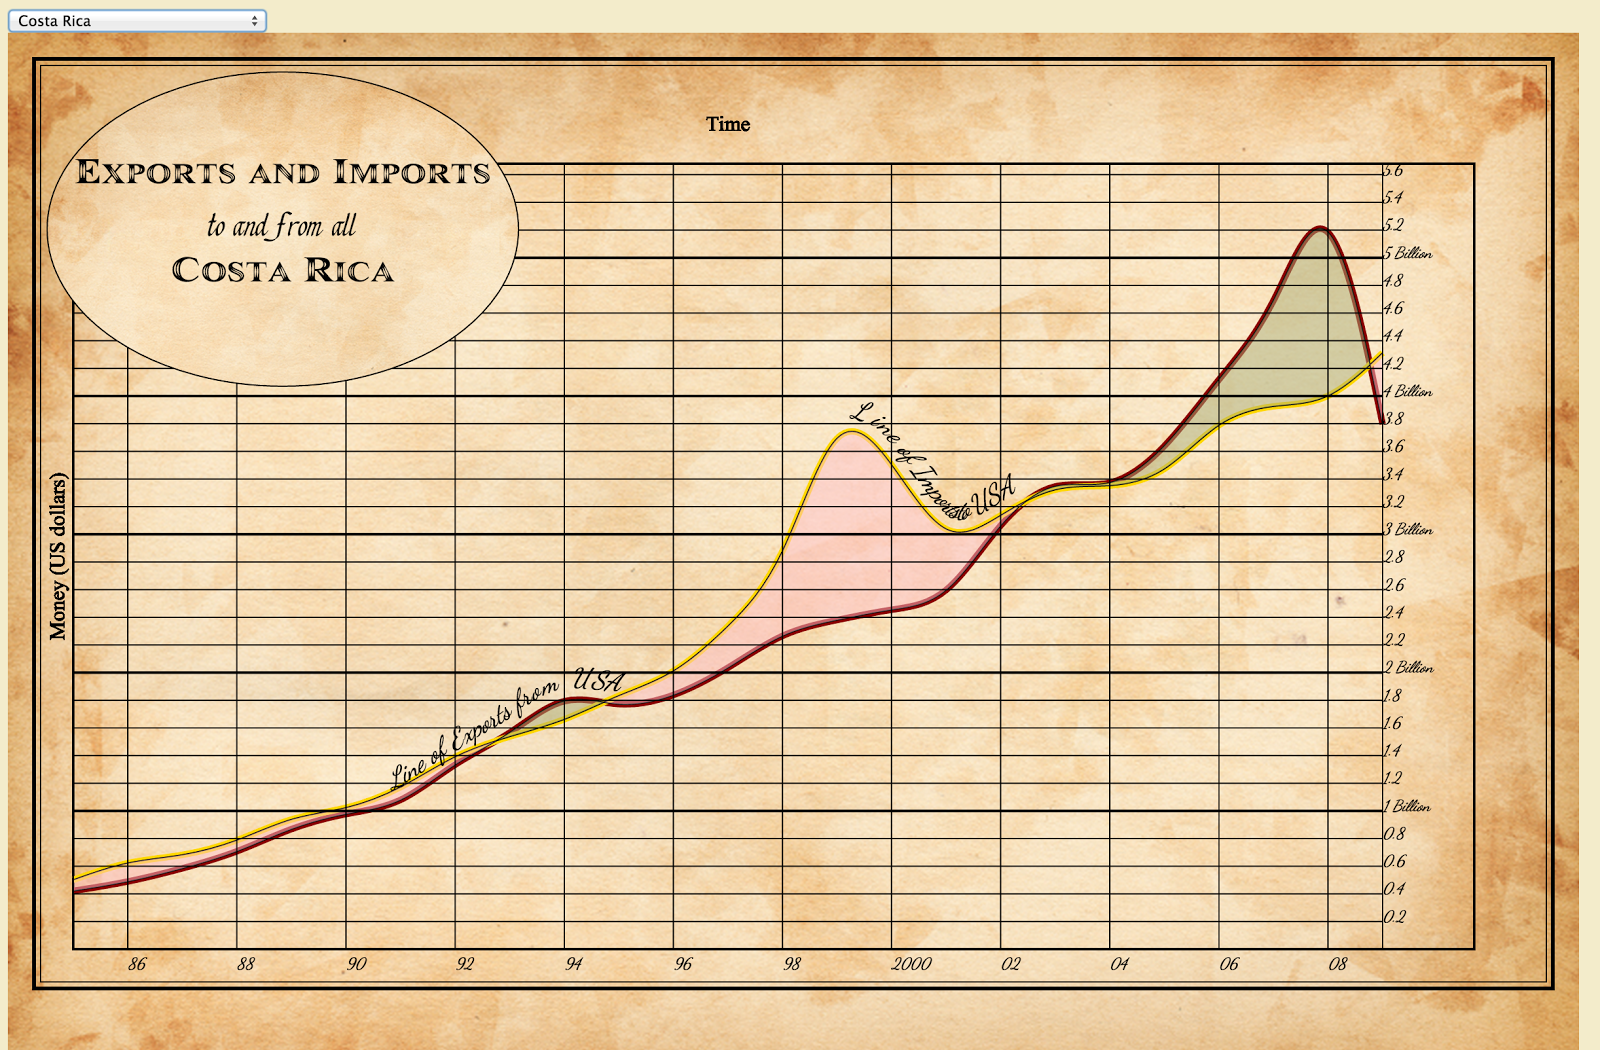 Figure 3: Interactive version of Playfair’s time-series charts. The user selects the country to display through a drop-down menu. Implementation and image by E. Pramer